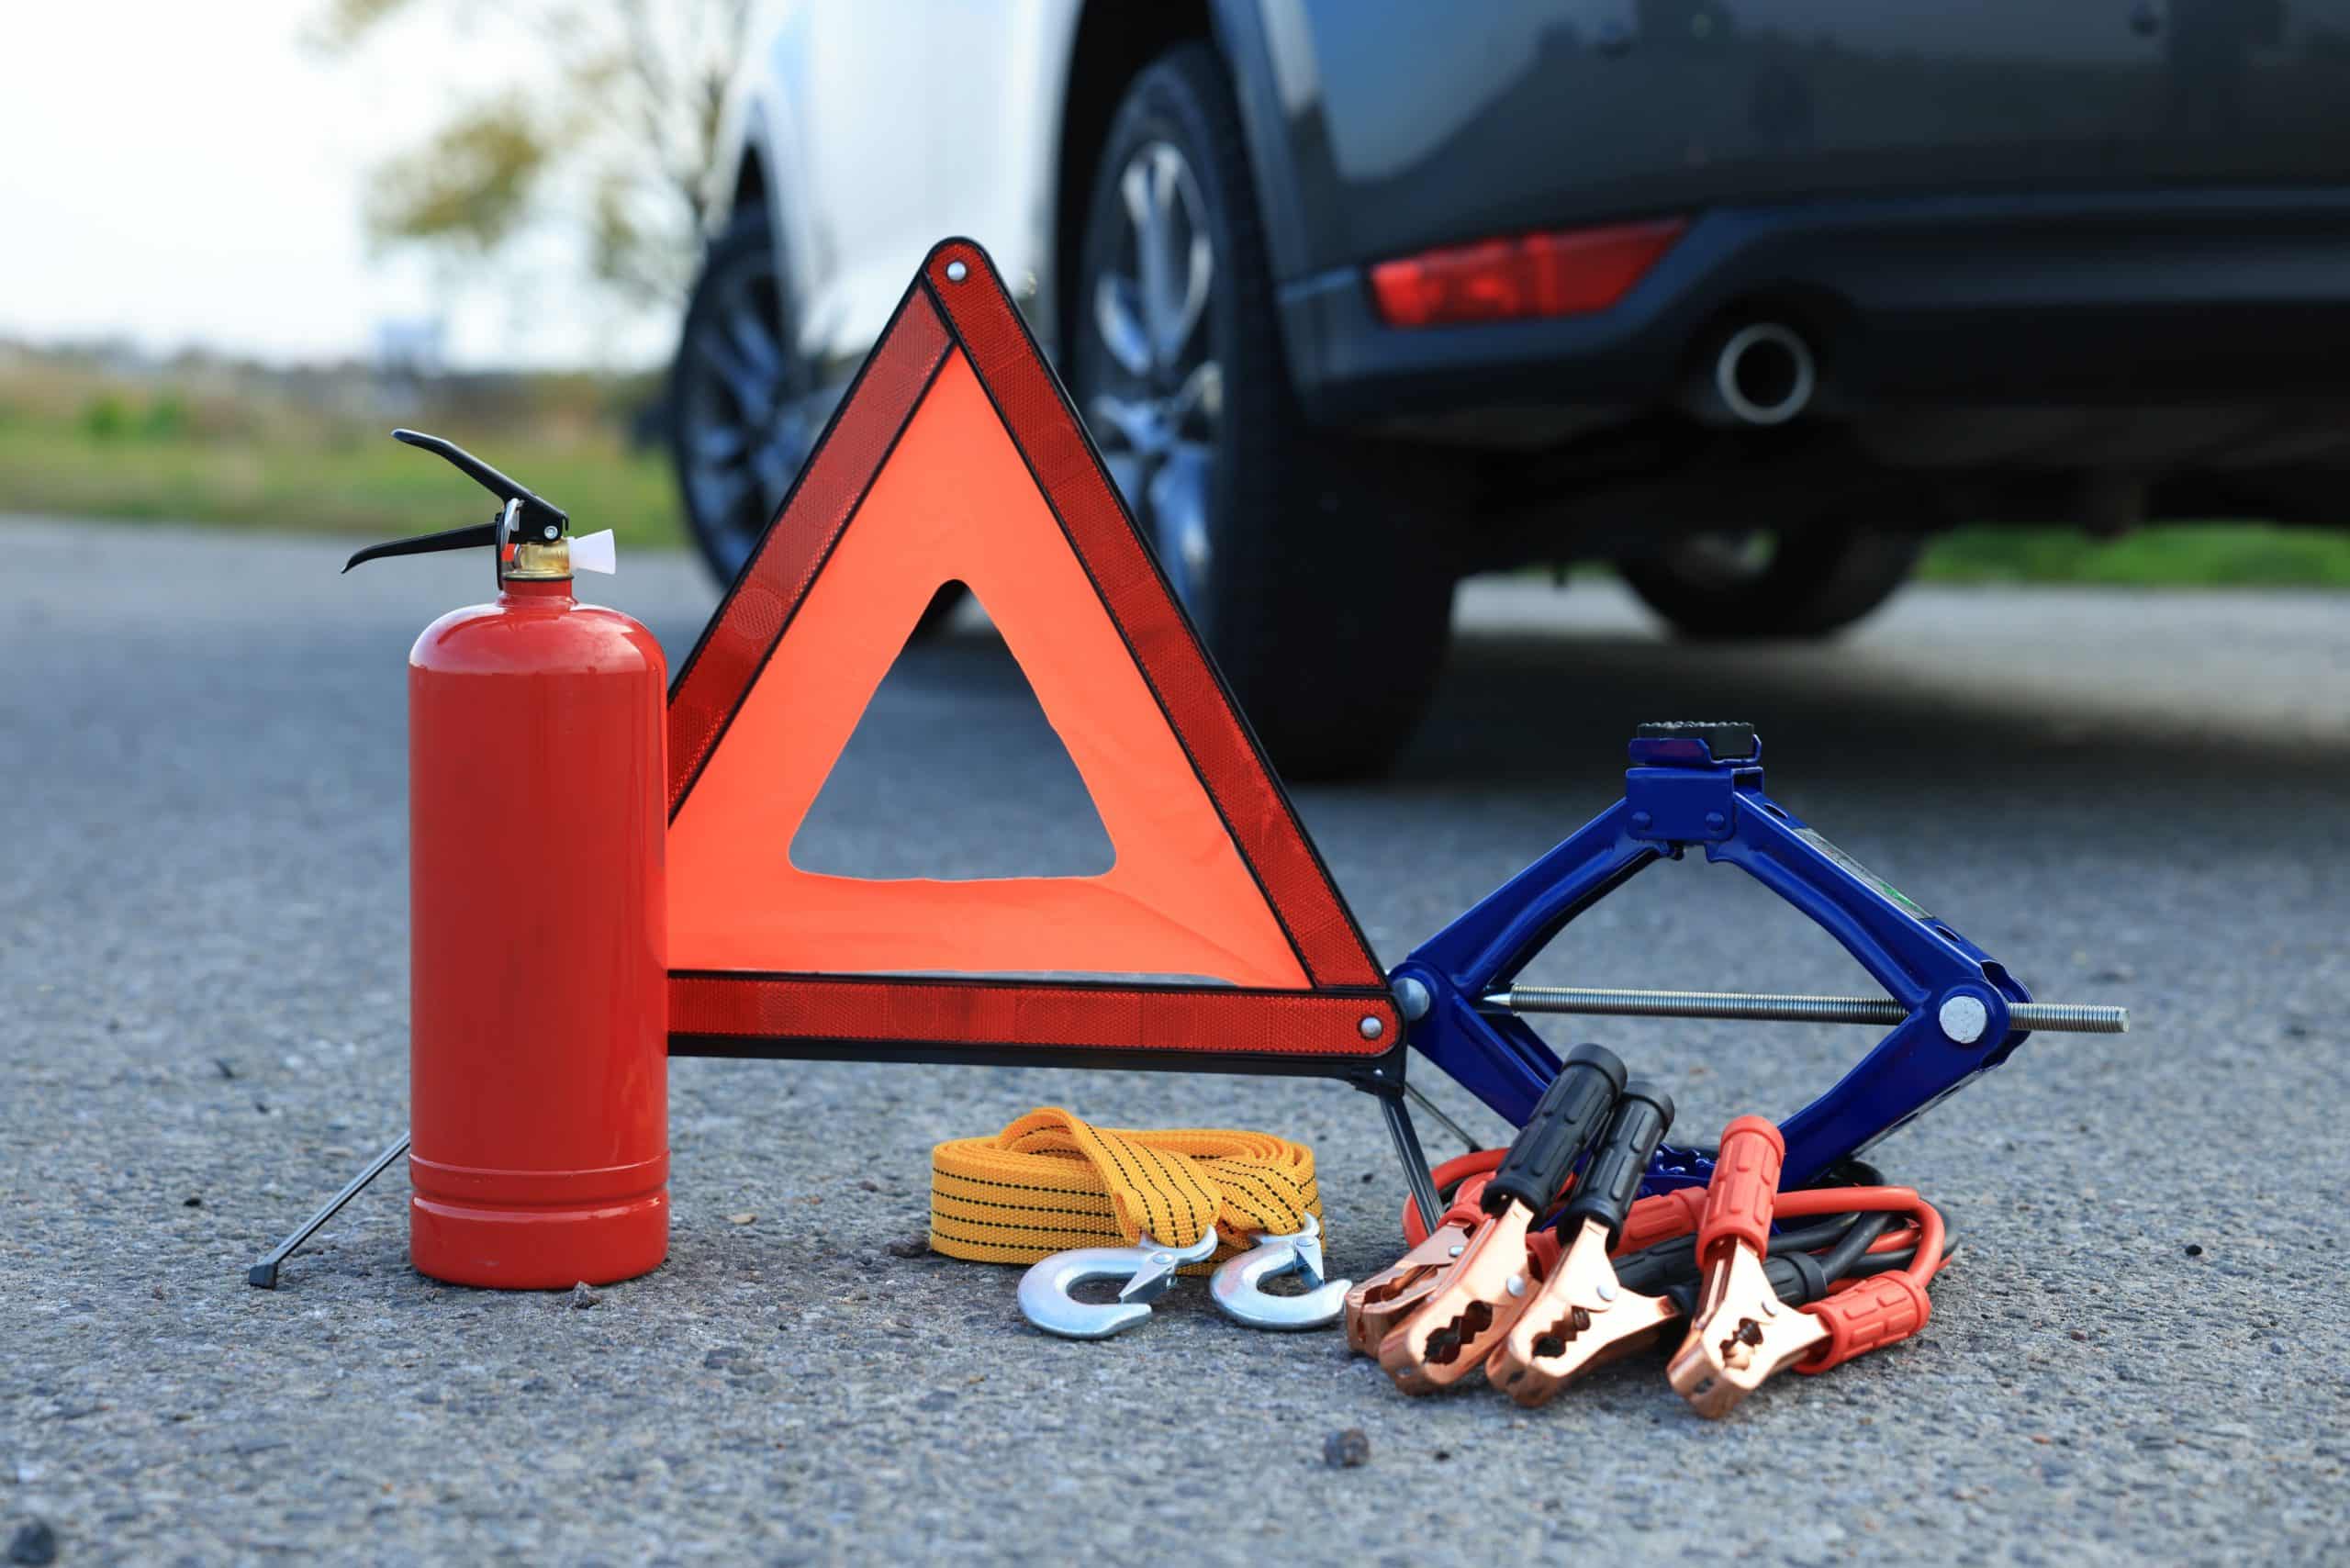 Emergency Warning Triangle And Car Safety Equipment Outdoors